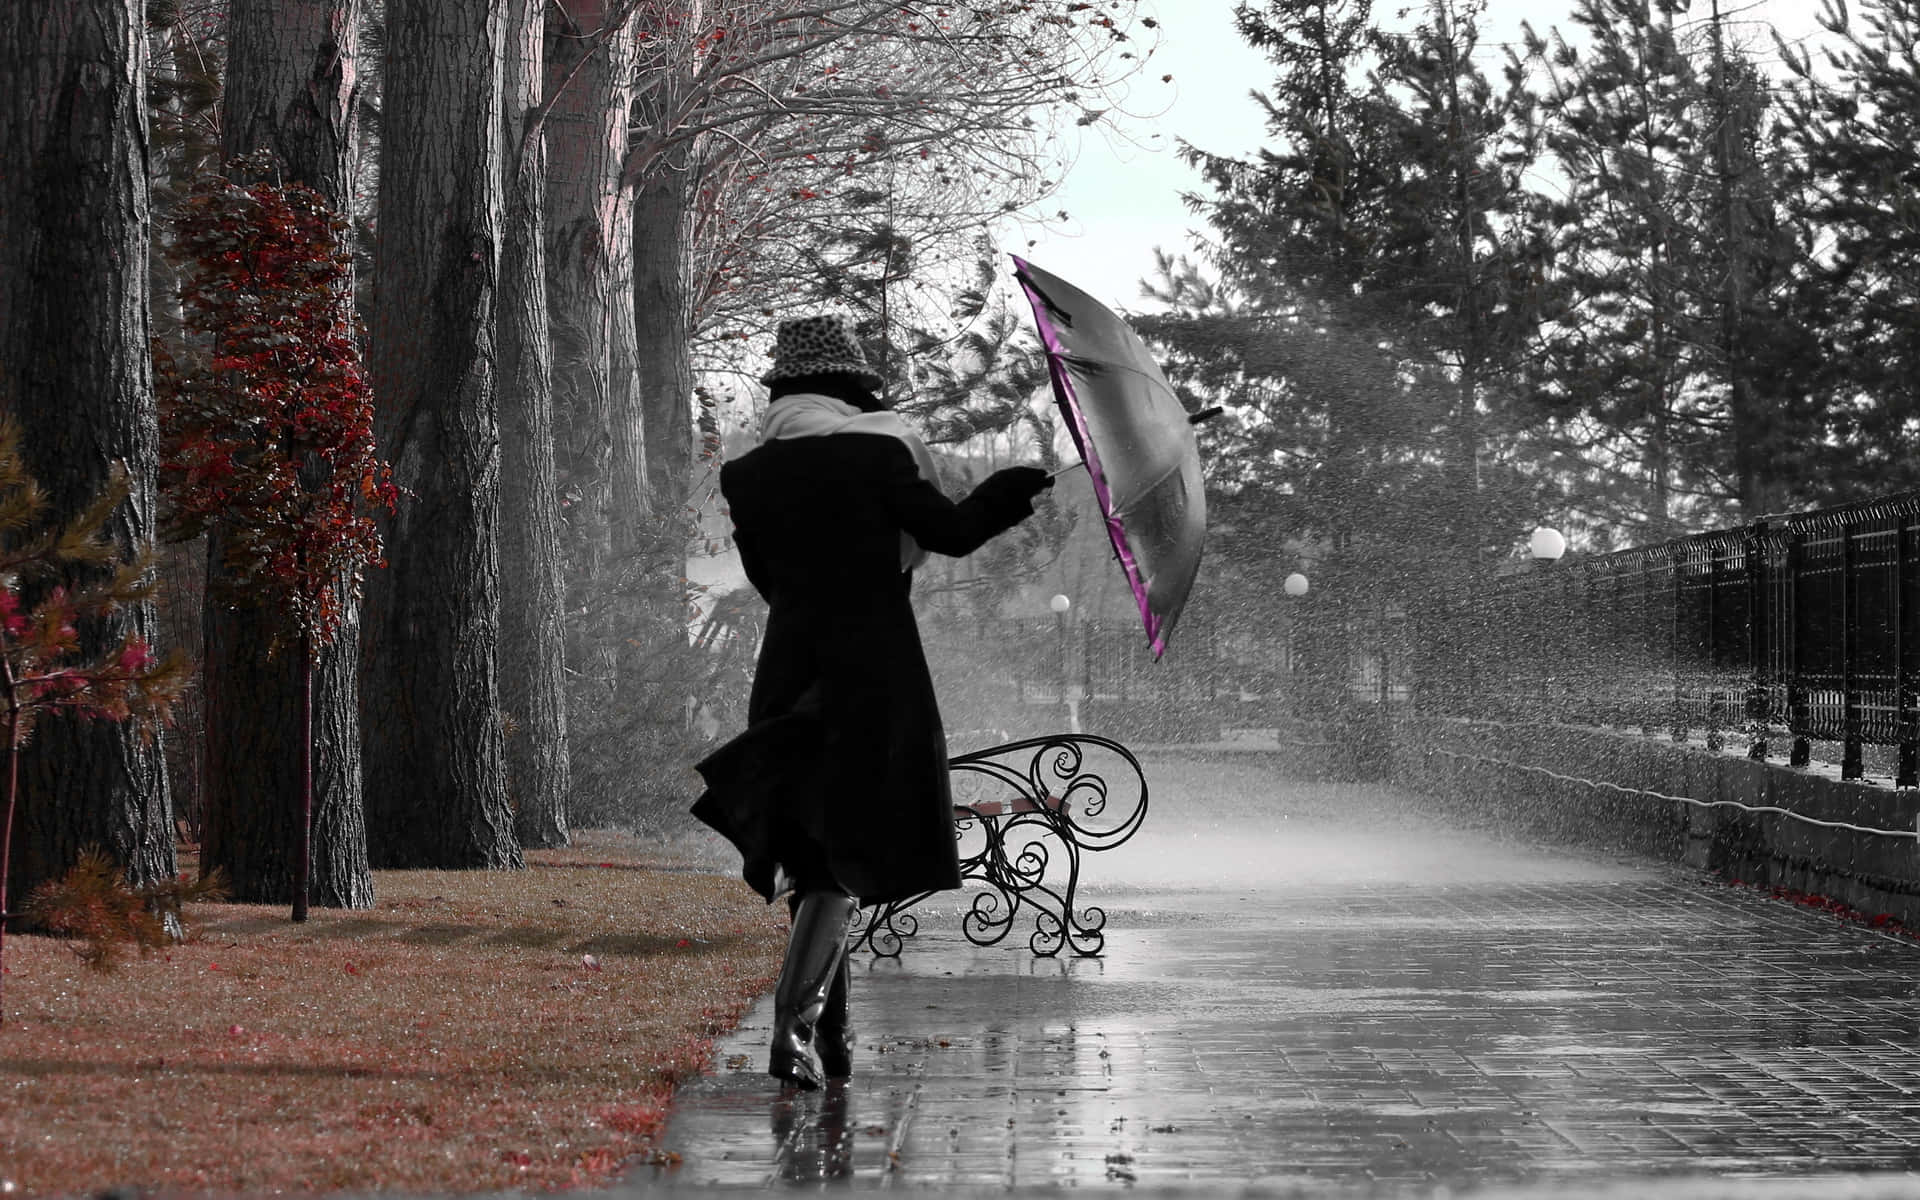 Woman With Umbrella At The Park On Rainy Day Picture